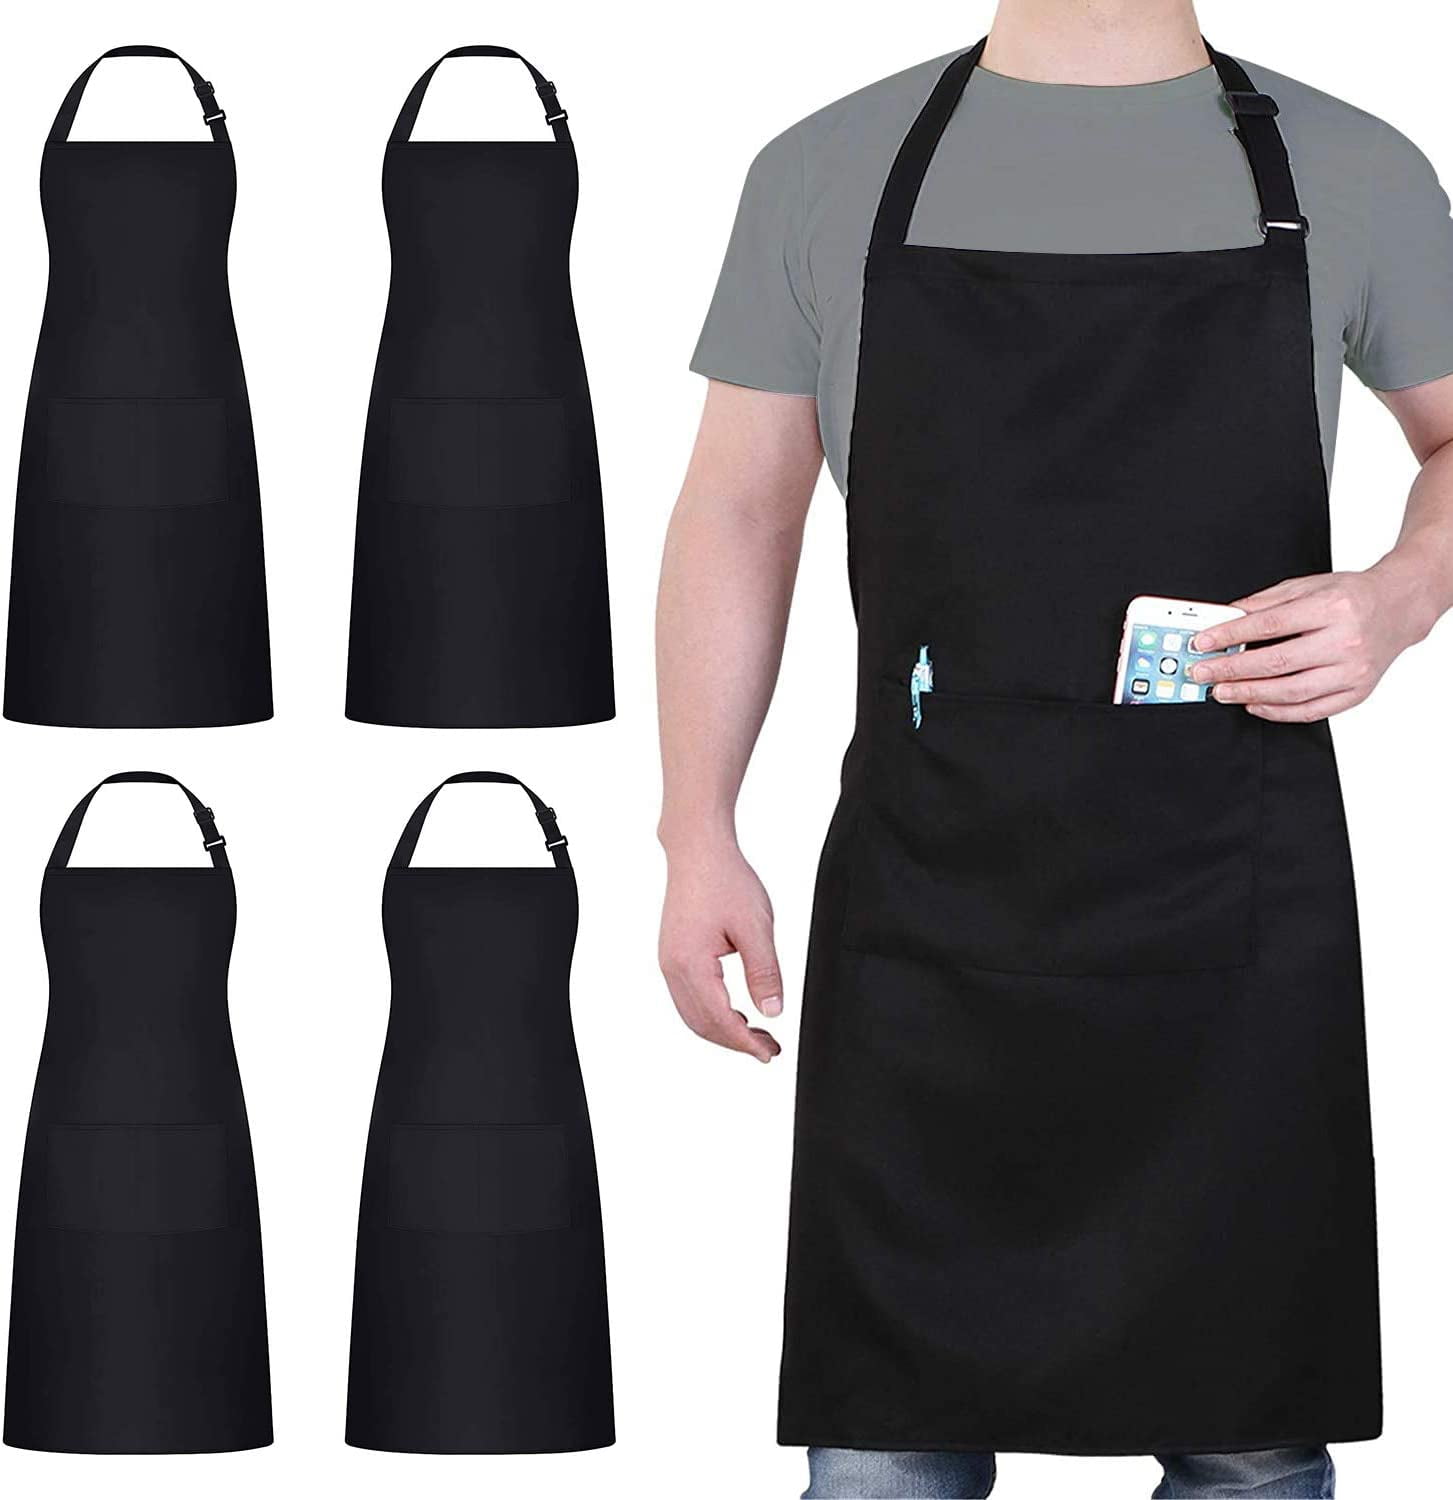 Zulay Kitchen Funny Aprons for Men, Women & Couples Black - Cooking Puns, 2  - Fry's Food Stores